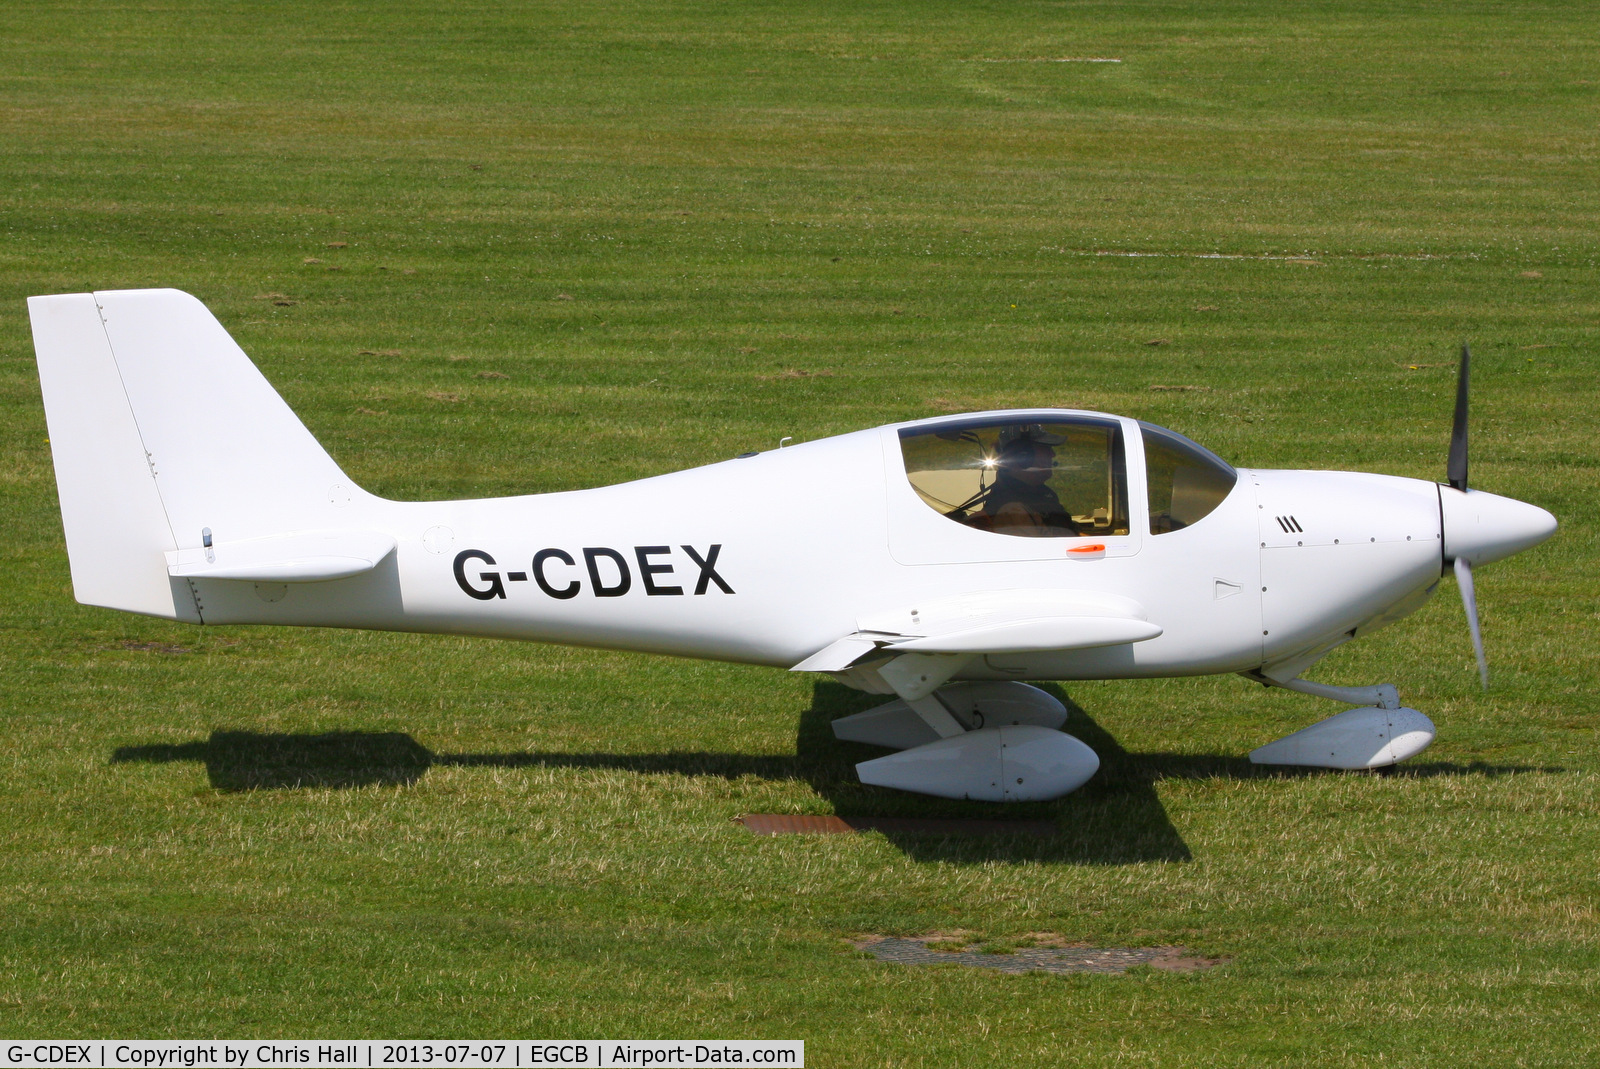 G-CDEX, 2004 Europa Tri Gear C/N PFA 247-12507, at the Barton open day and fly in